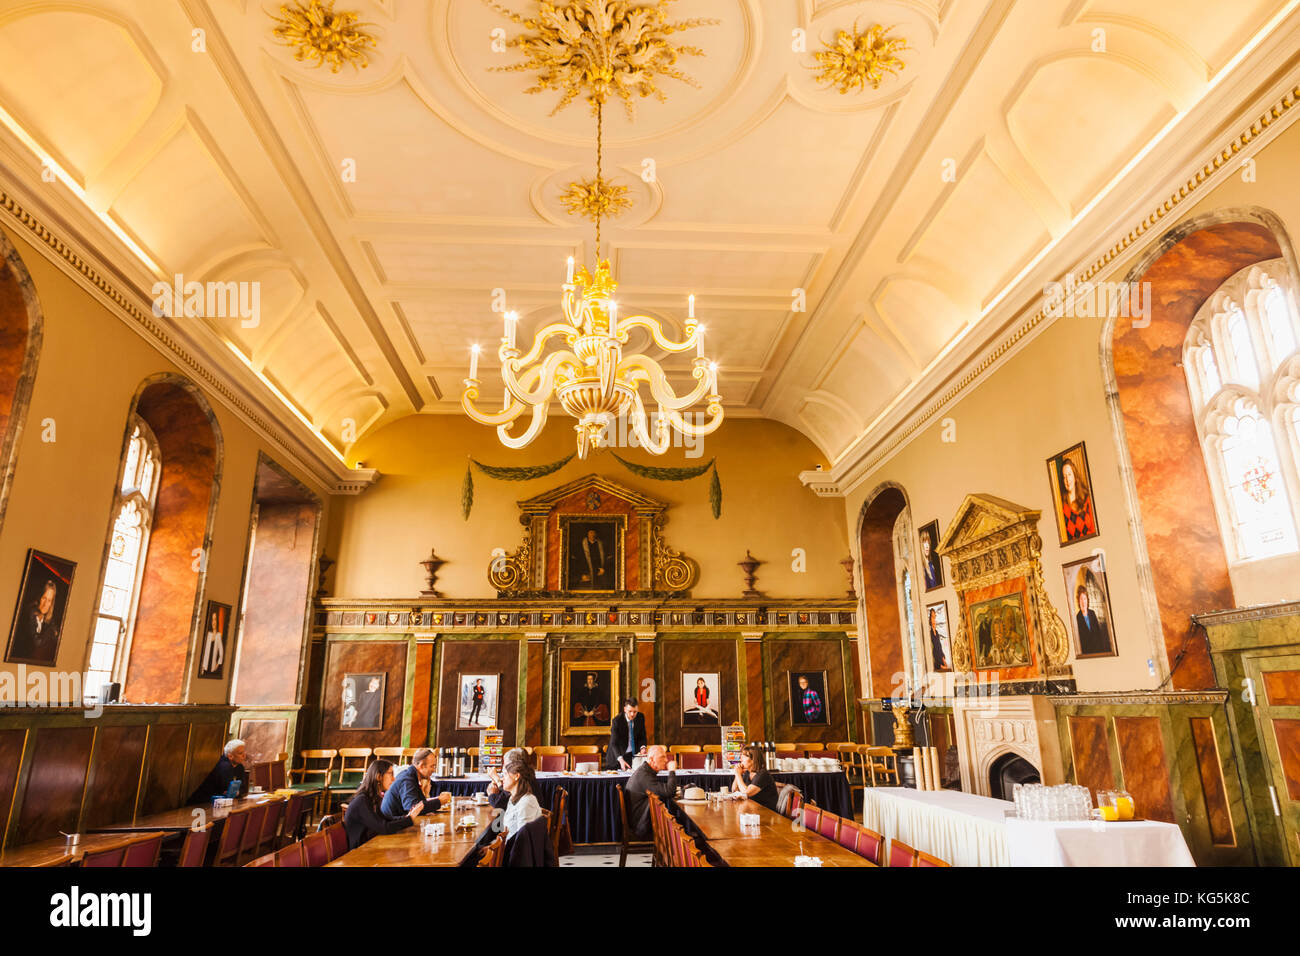 England, Oxfordshire, Oxford, Oxford University, Trinity College, The Dining Hall Stock Photo